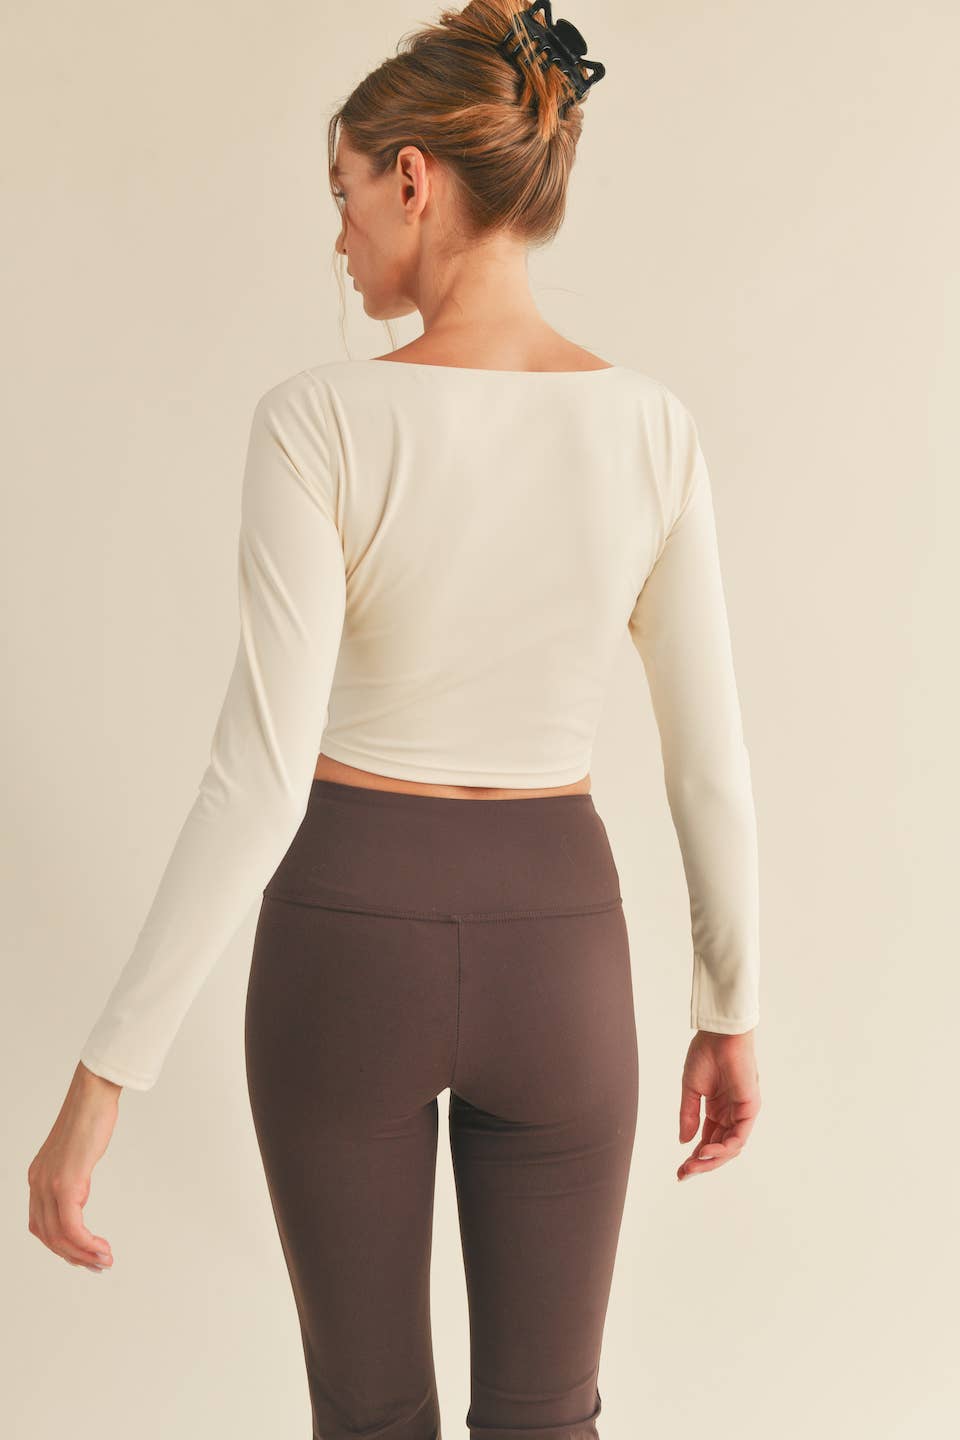 CREAM FITTED LONG SLEEVE TOP-CREAM